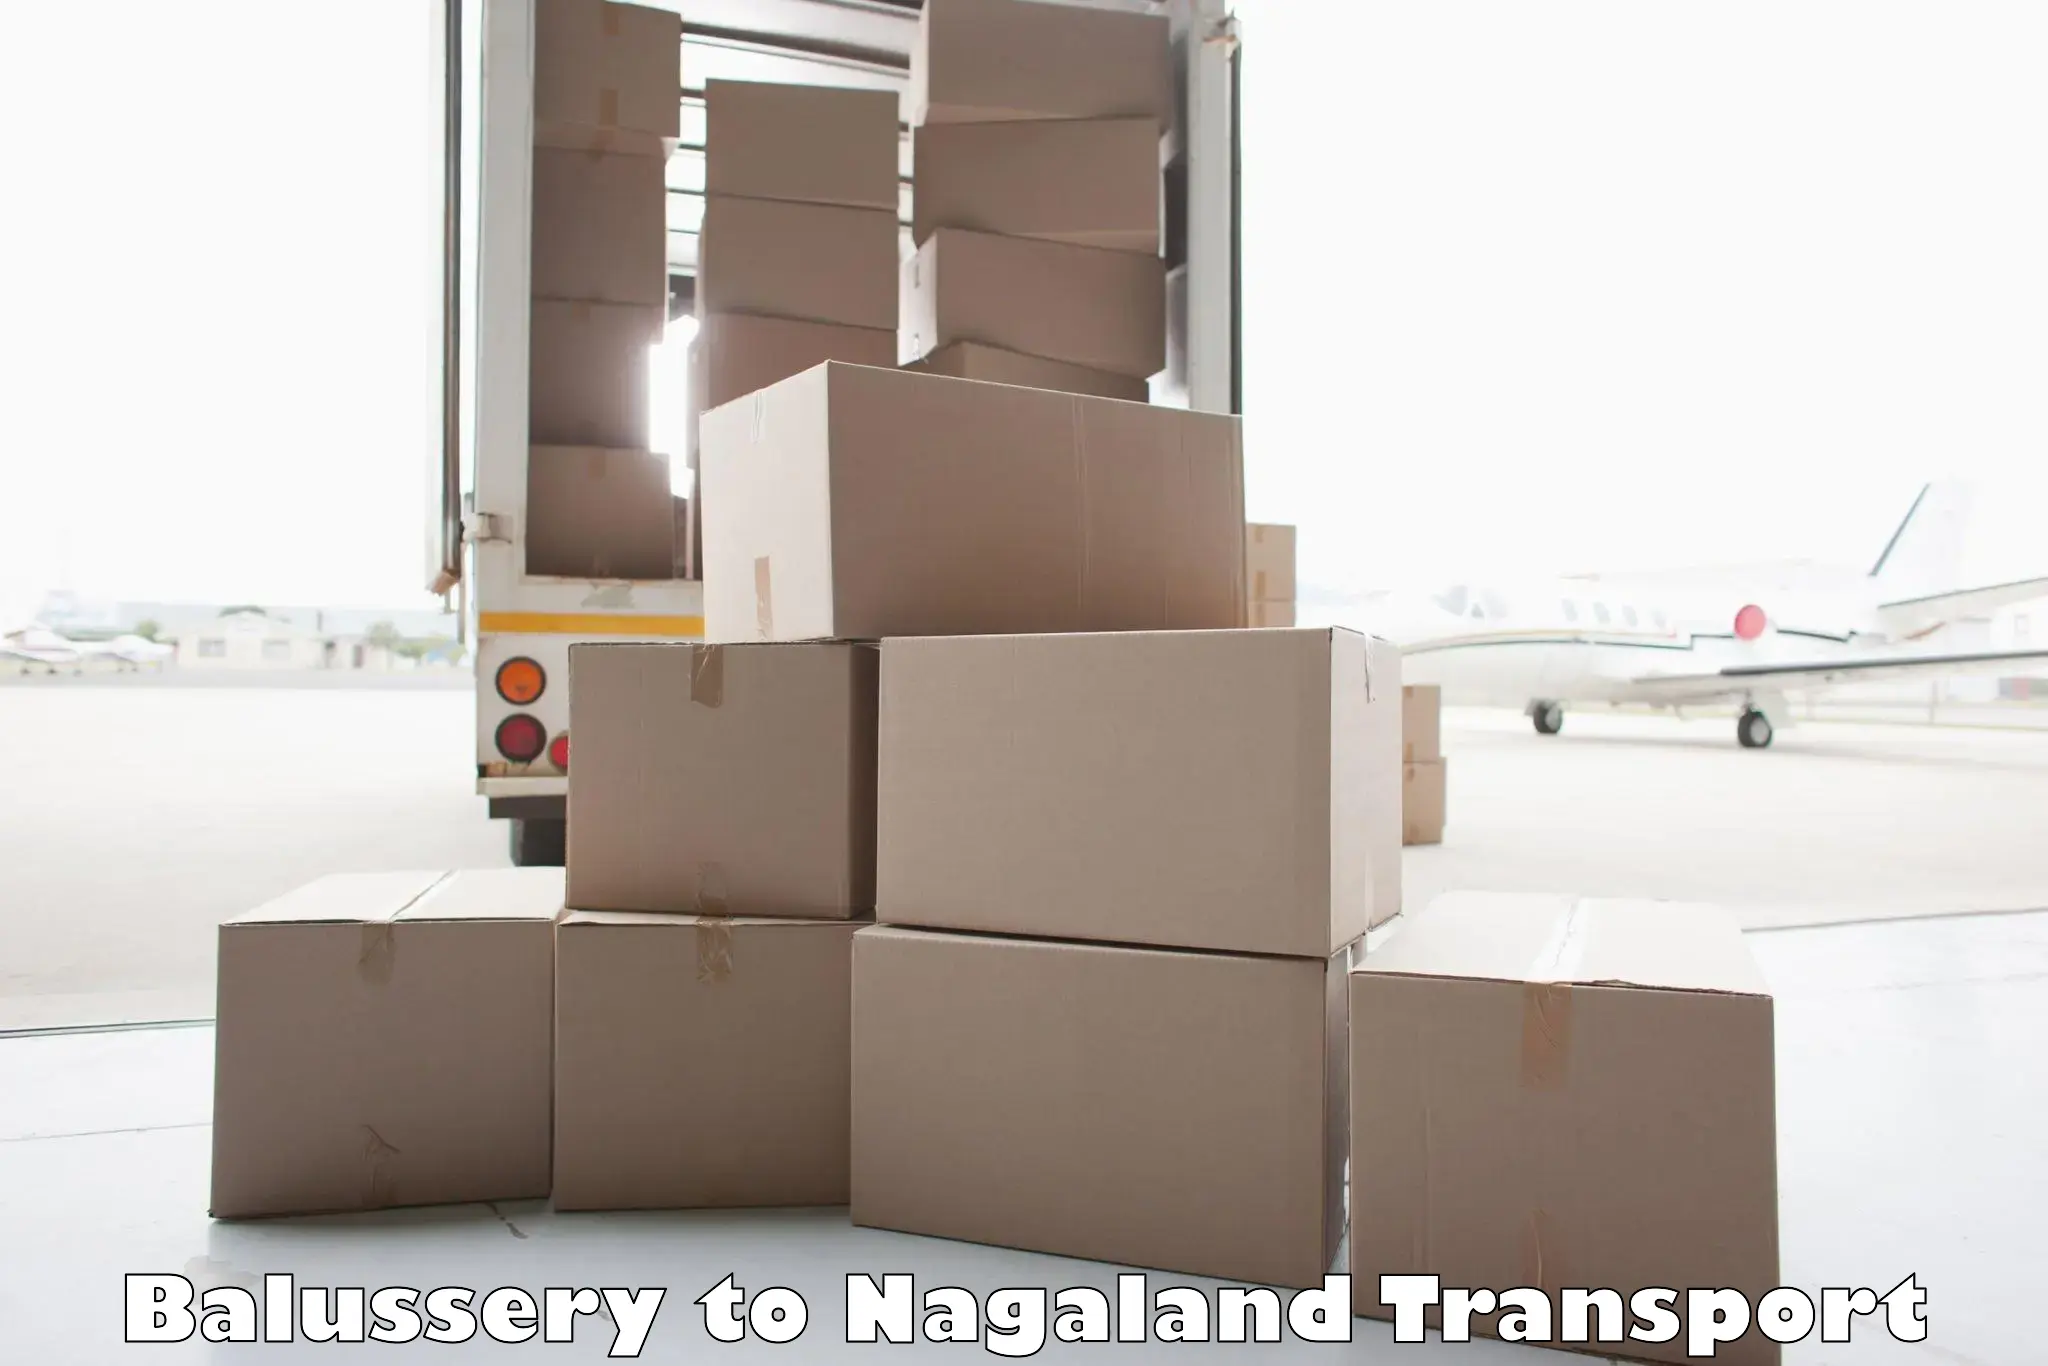 Logistics transportation services in Balussery to Nagaland